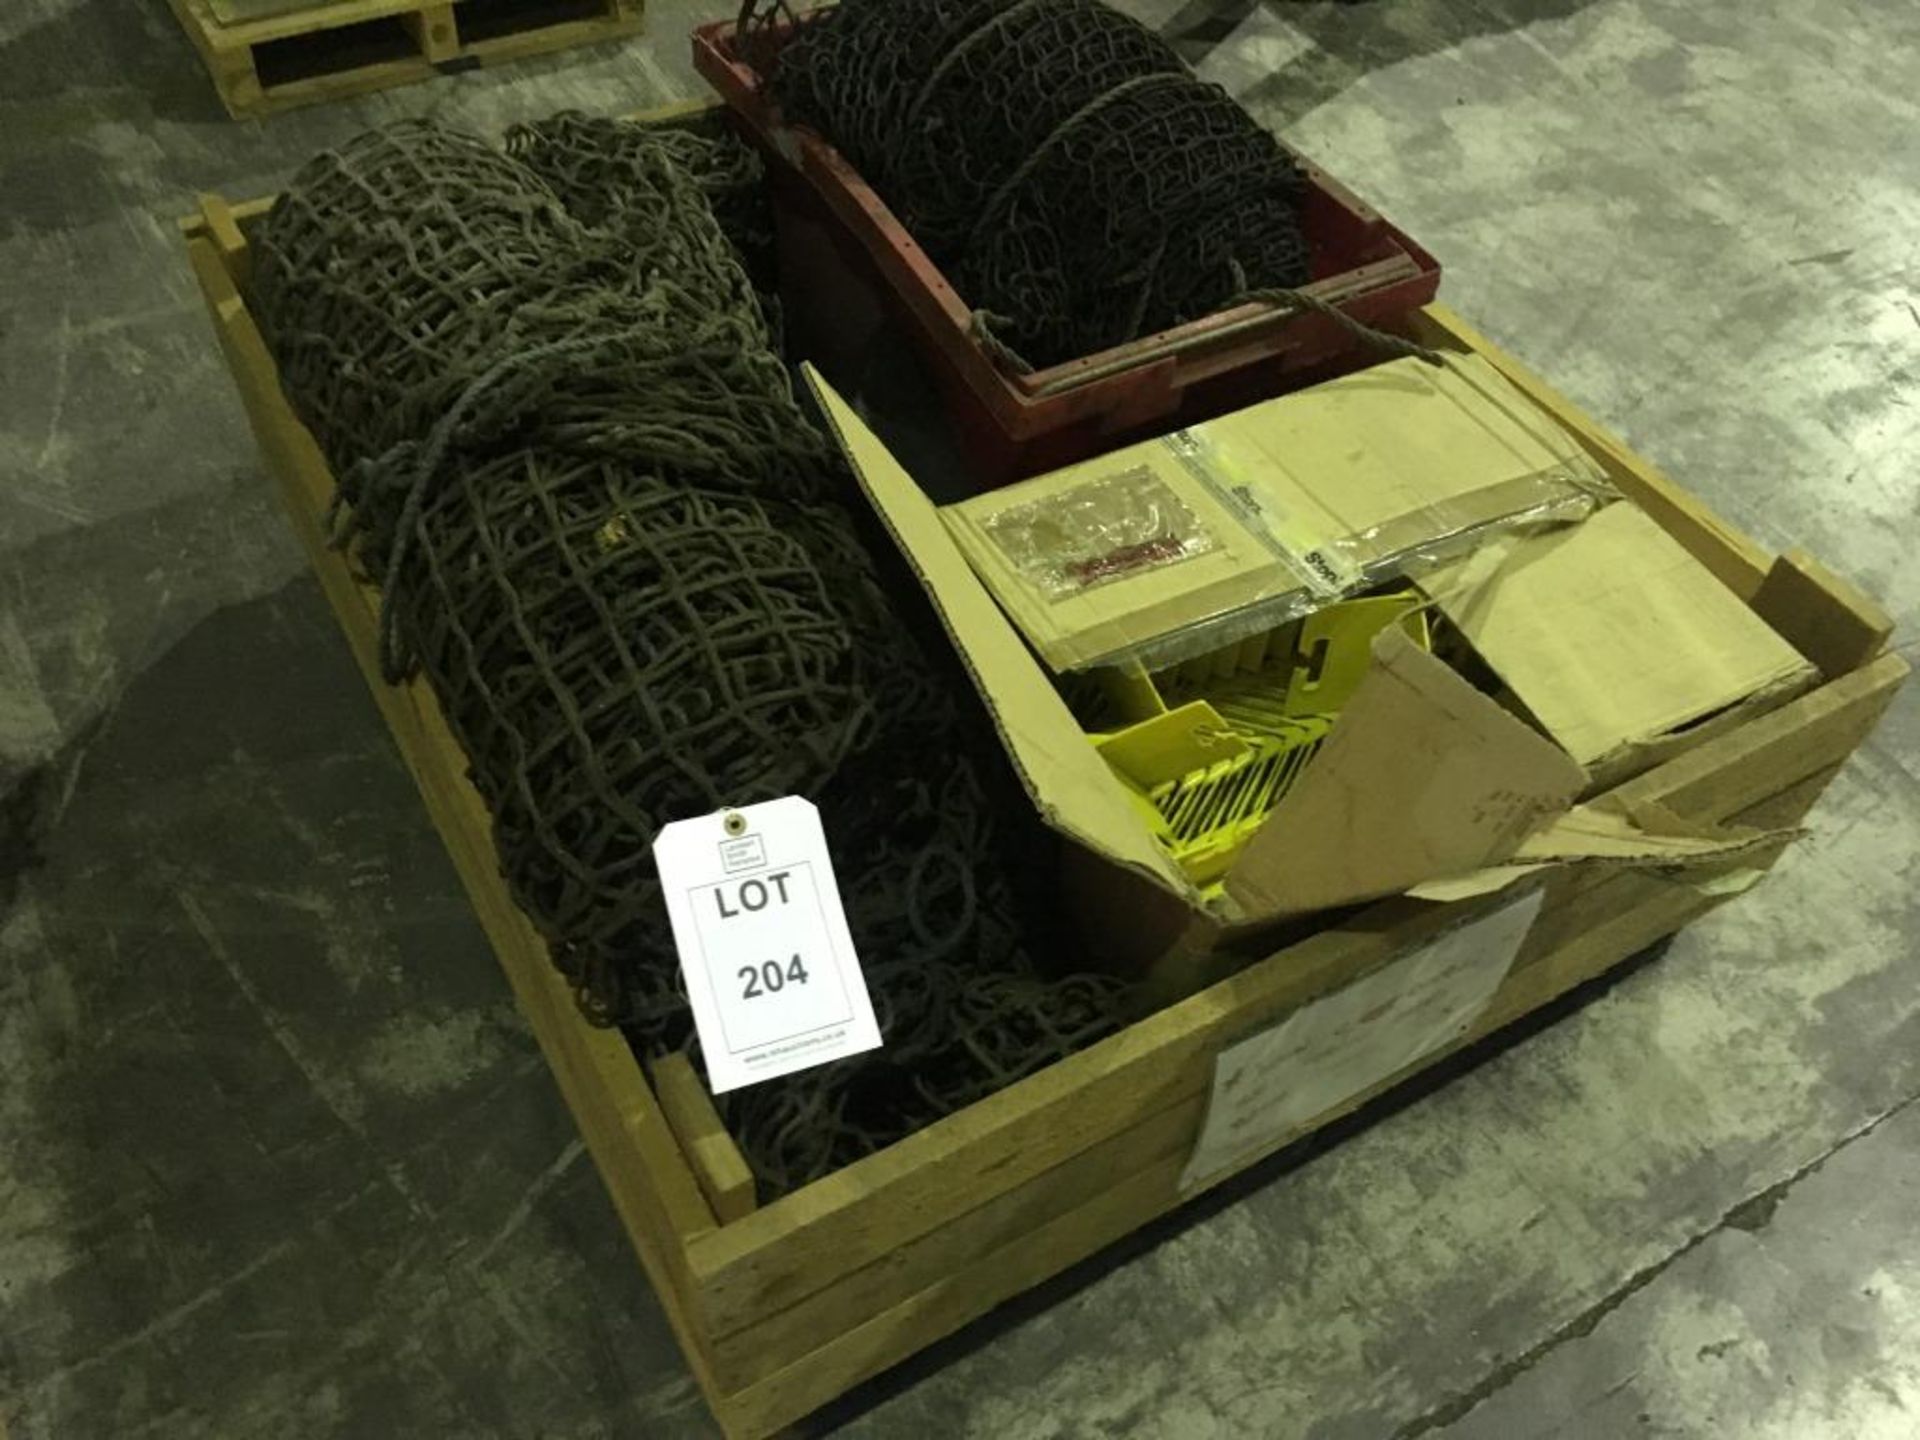 Assorted cargo nets, corner protectors, ratchets and straps on one pallet. Please note: This lot